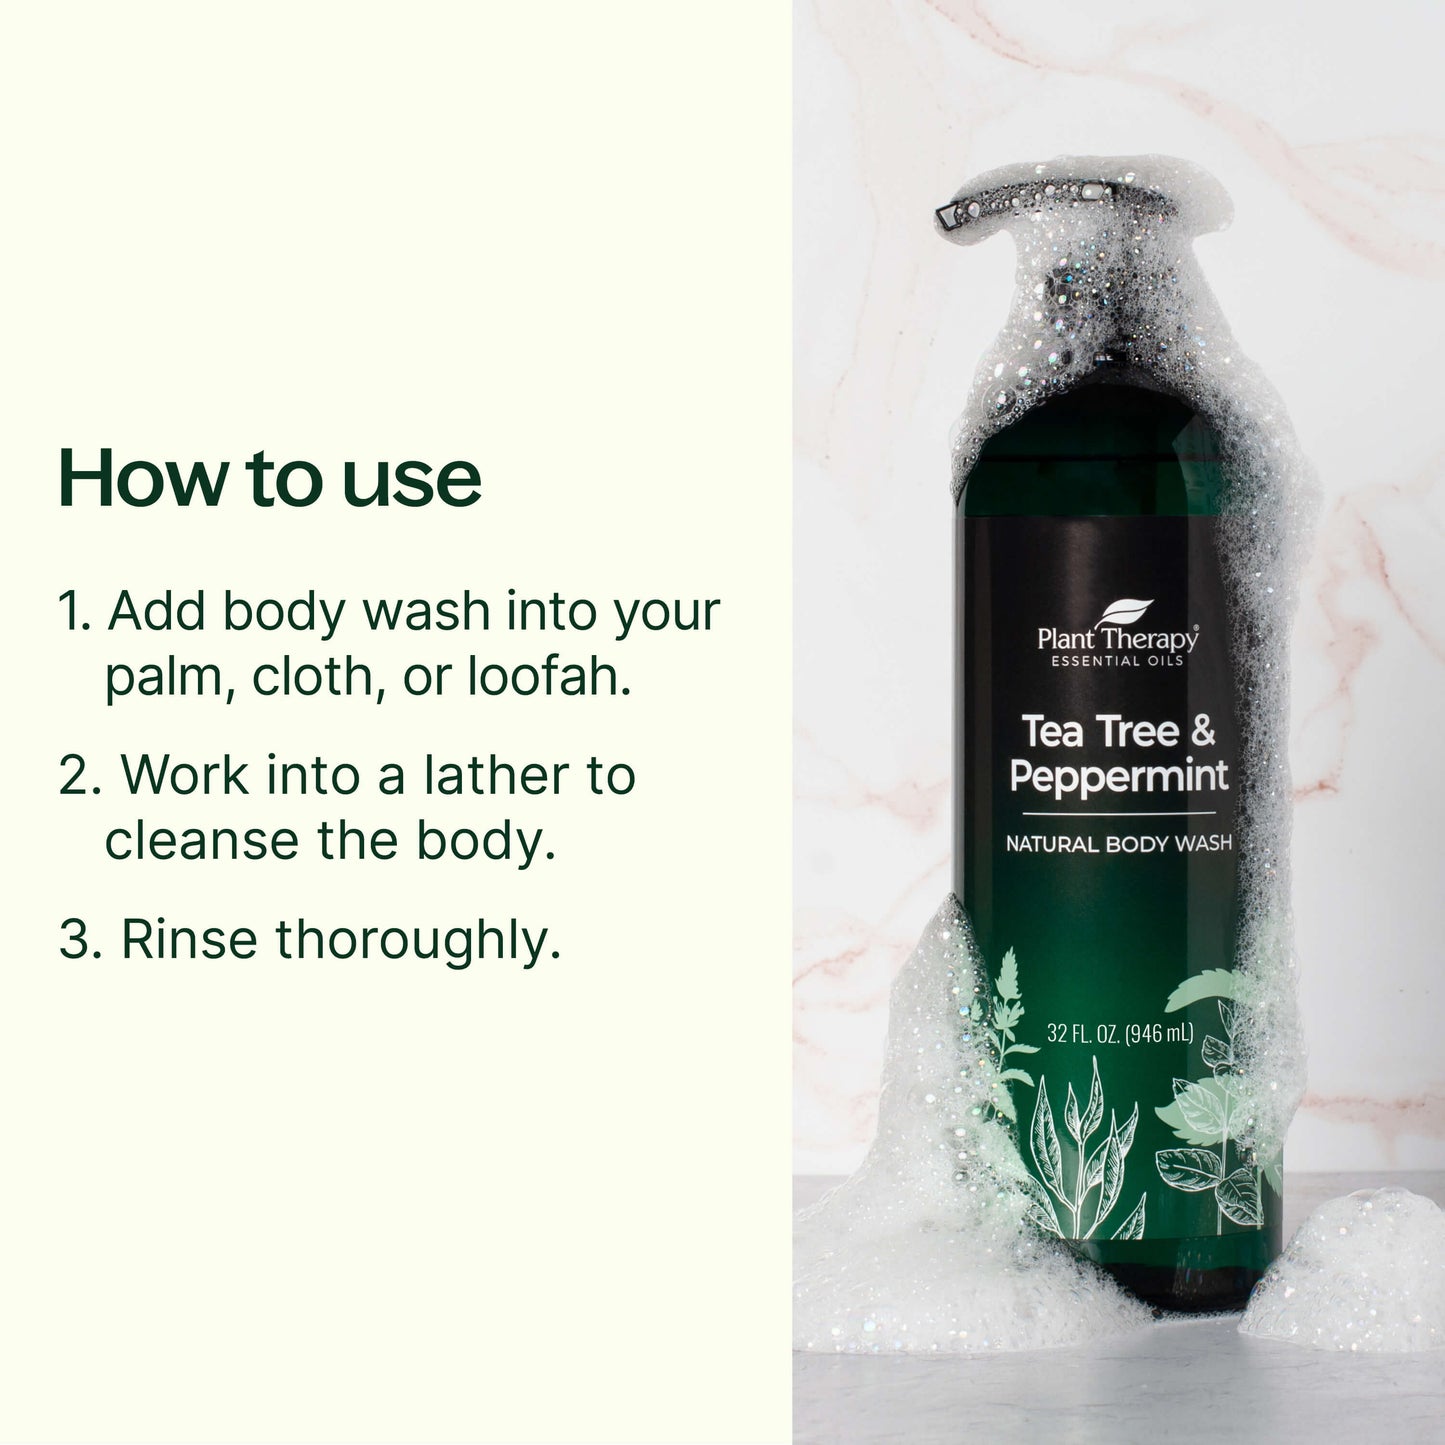 how to use Plant Therapy’s Tea Tree & Peppermint Natural Body Wash